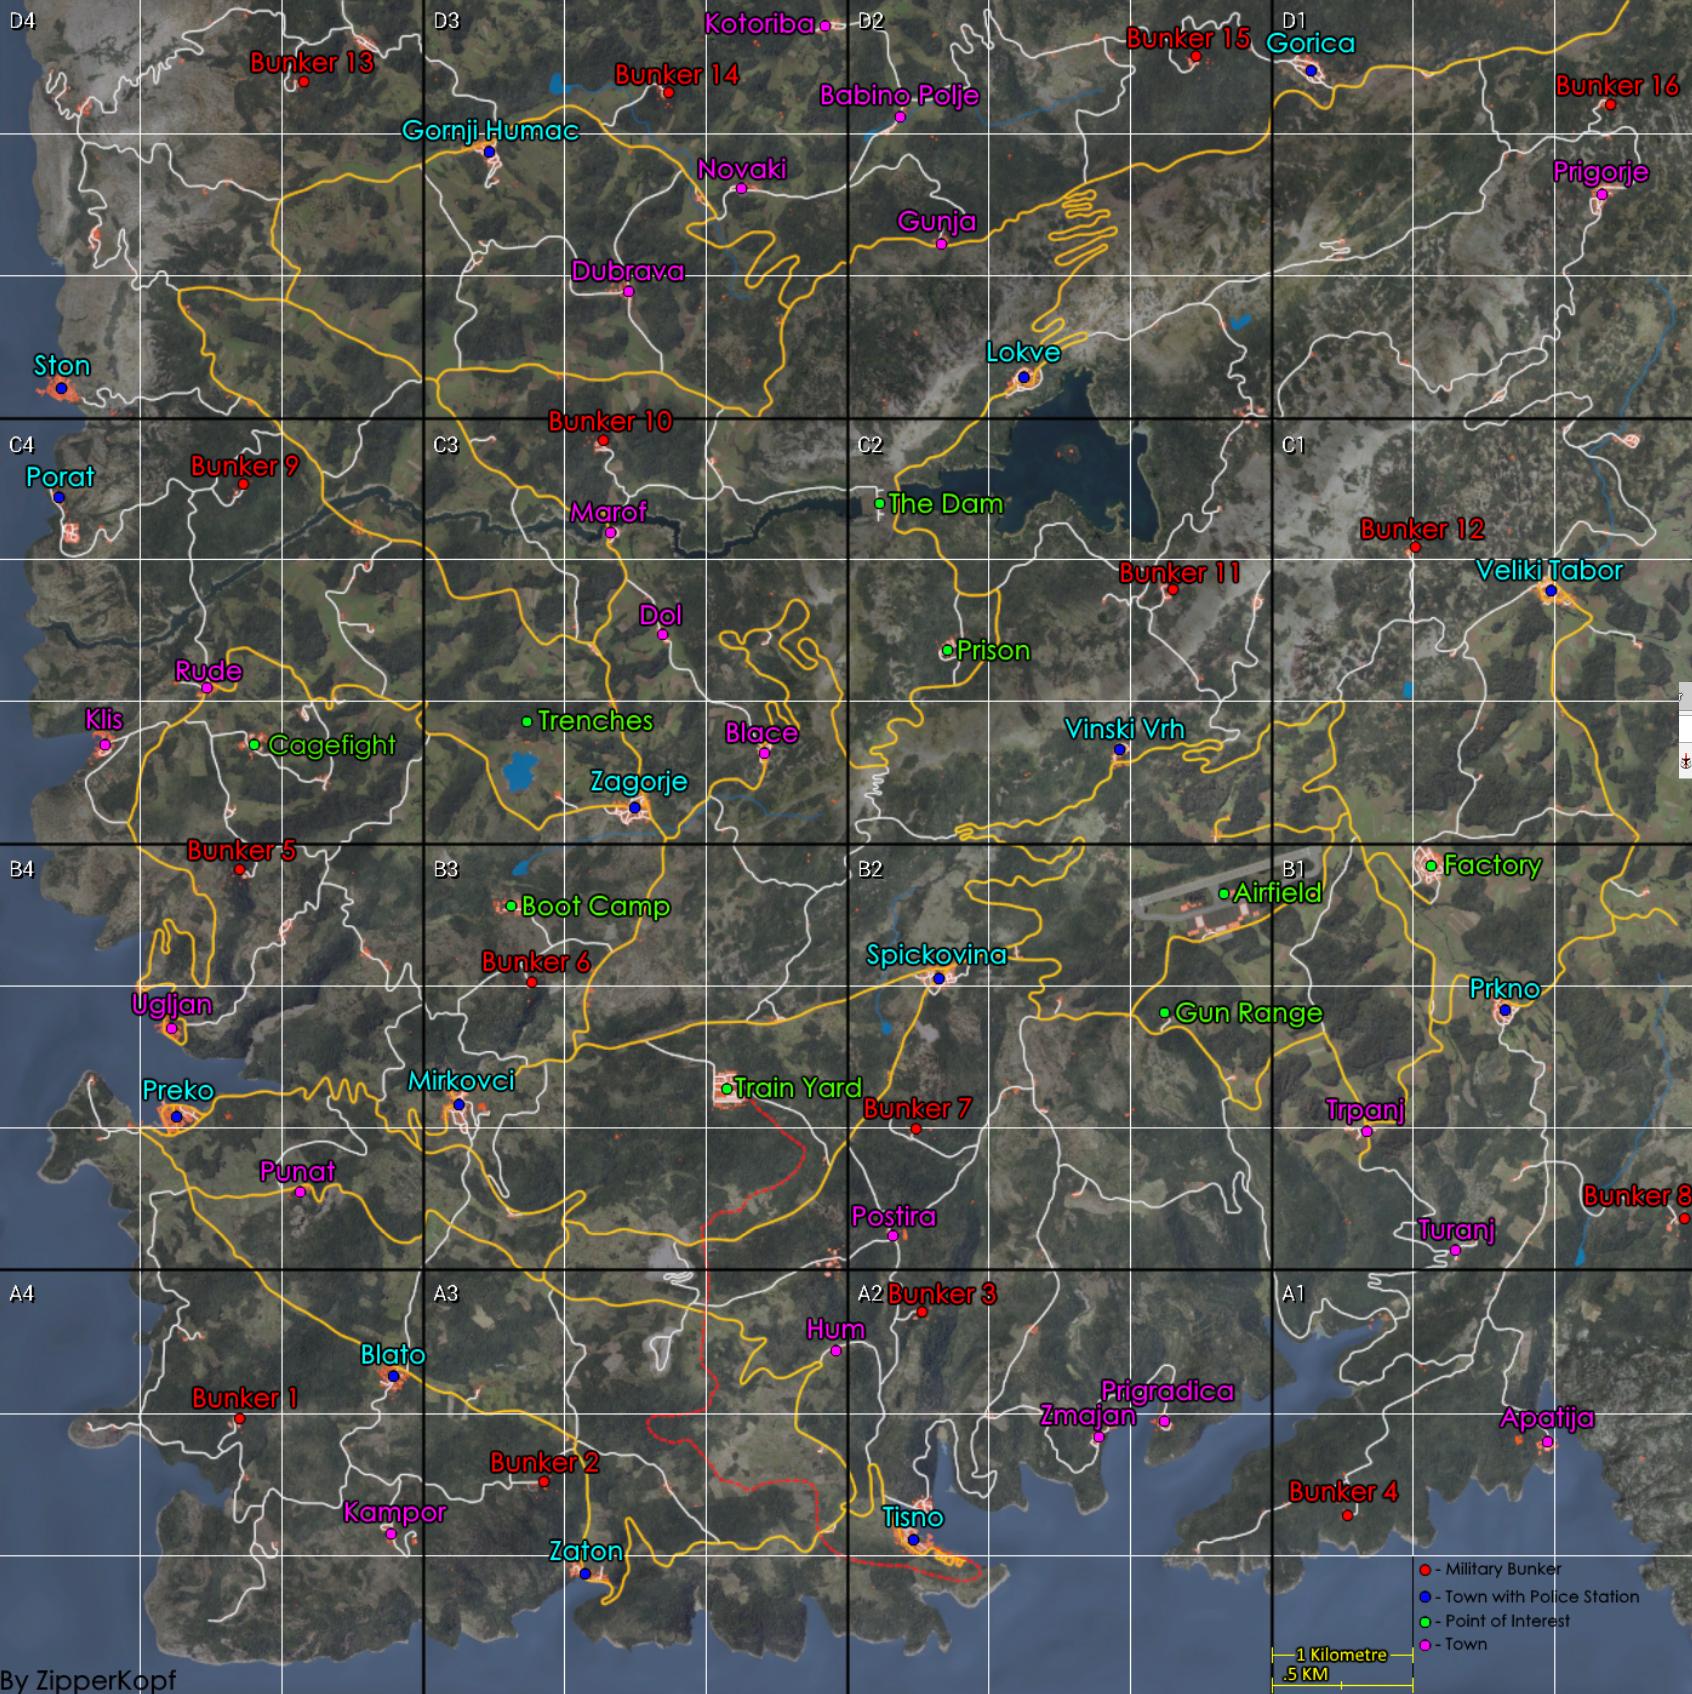 scum map with locations